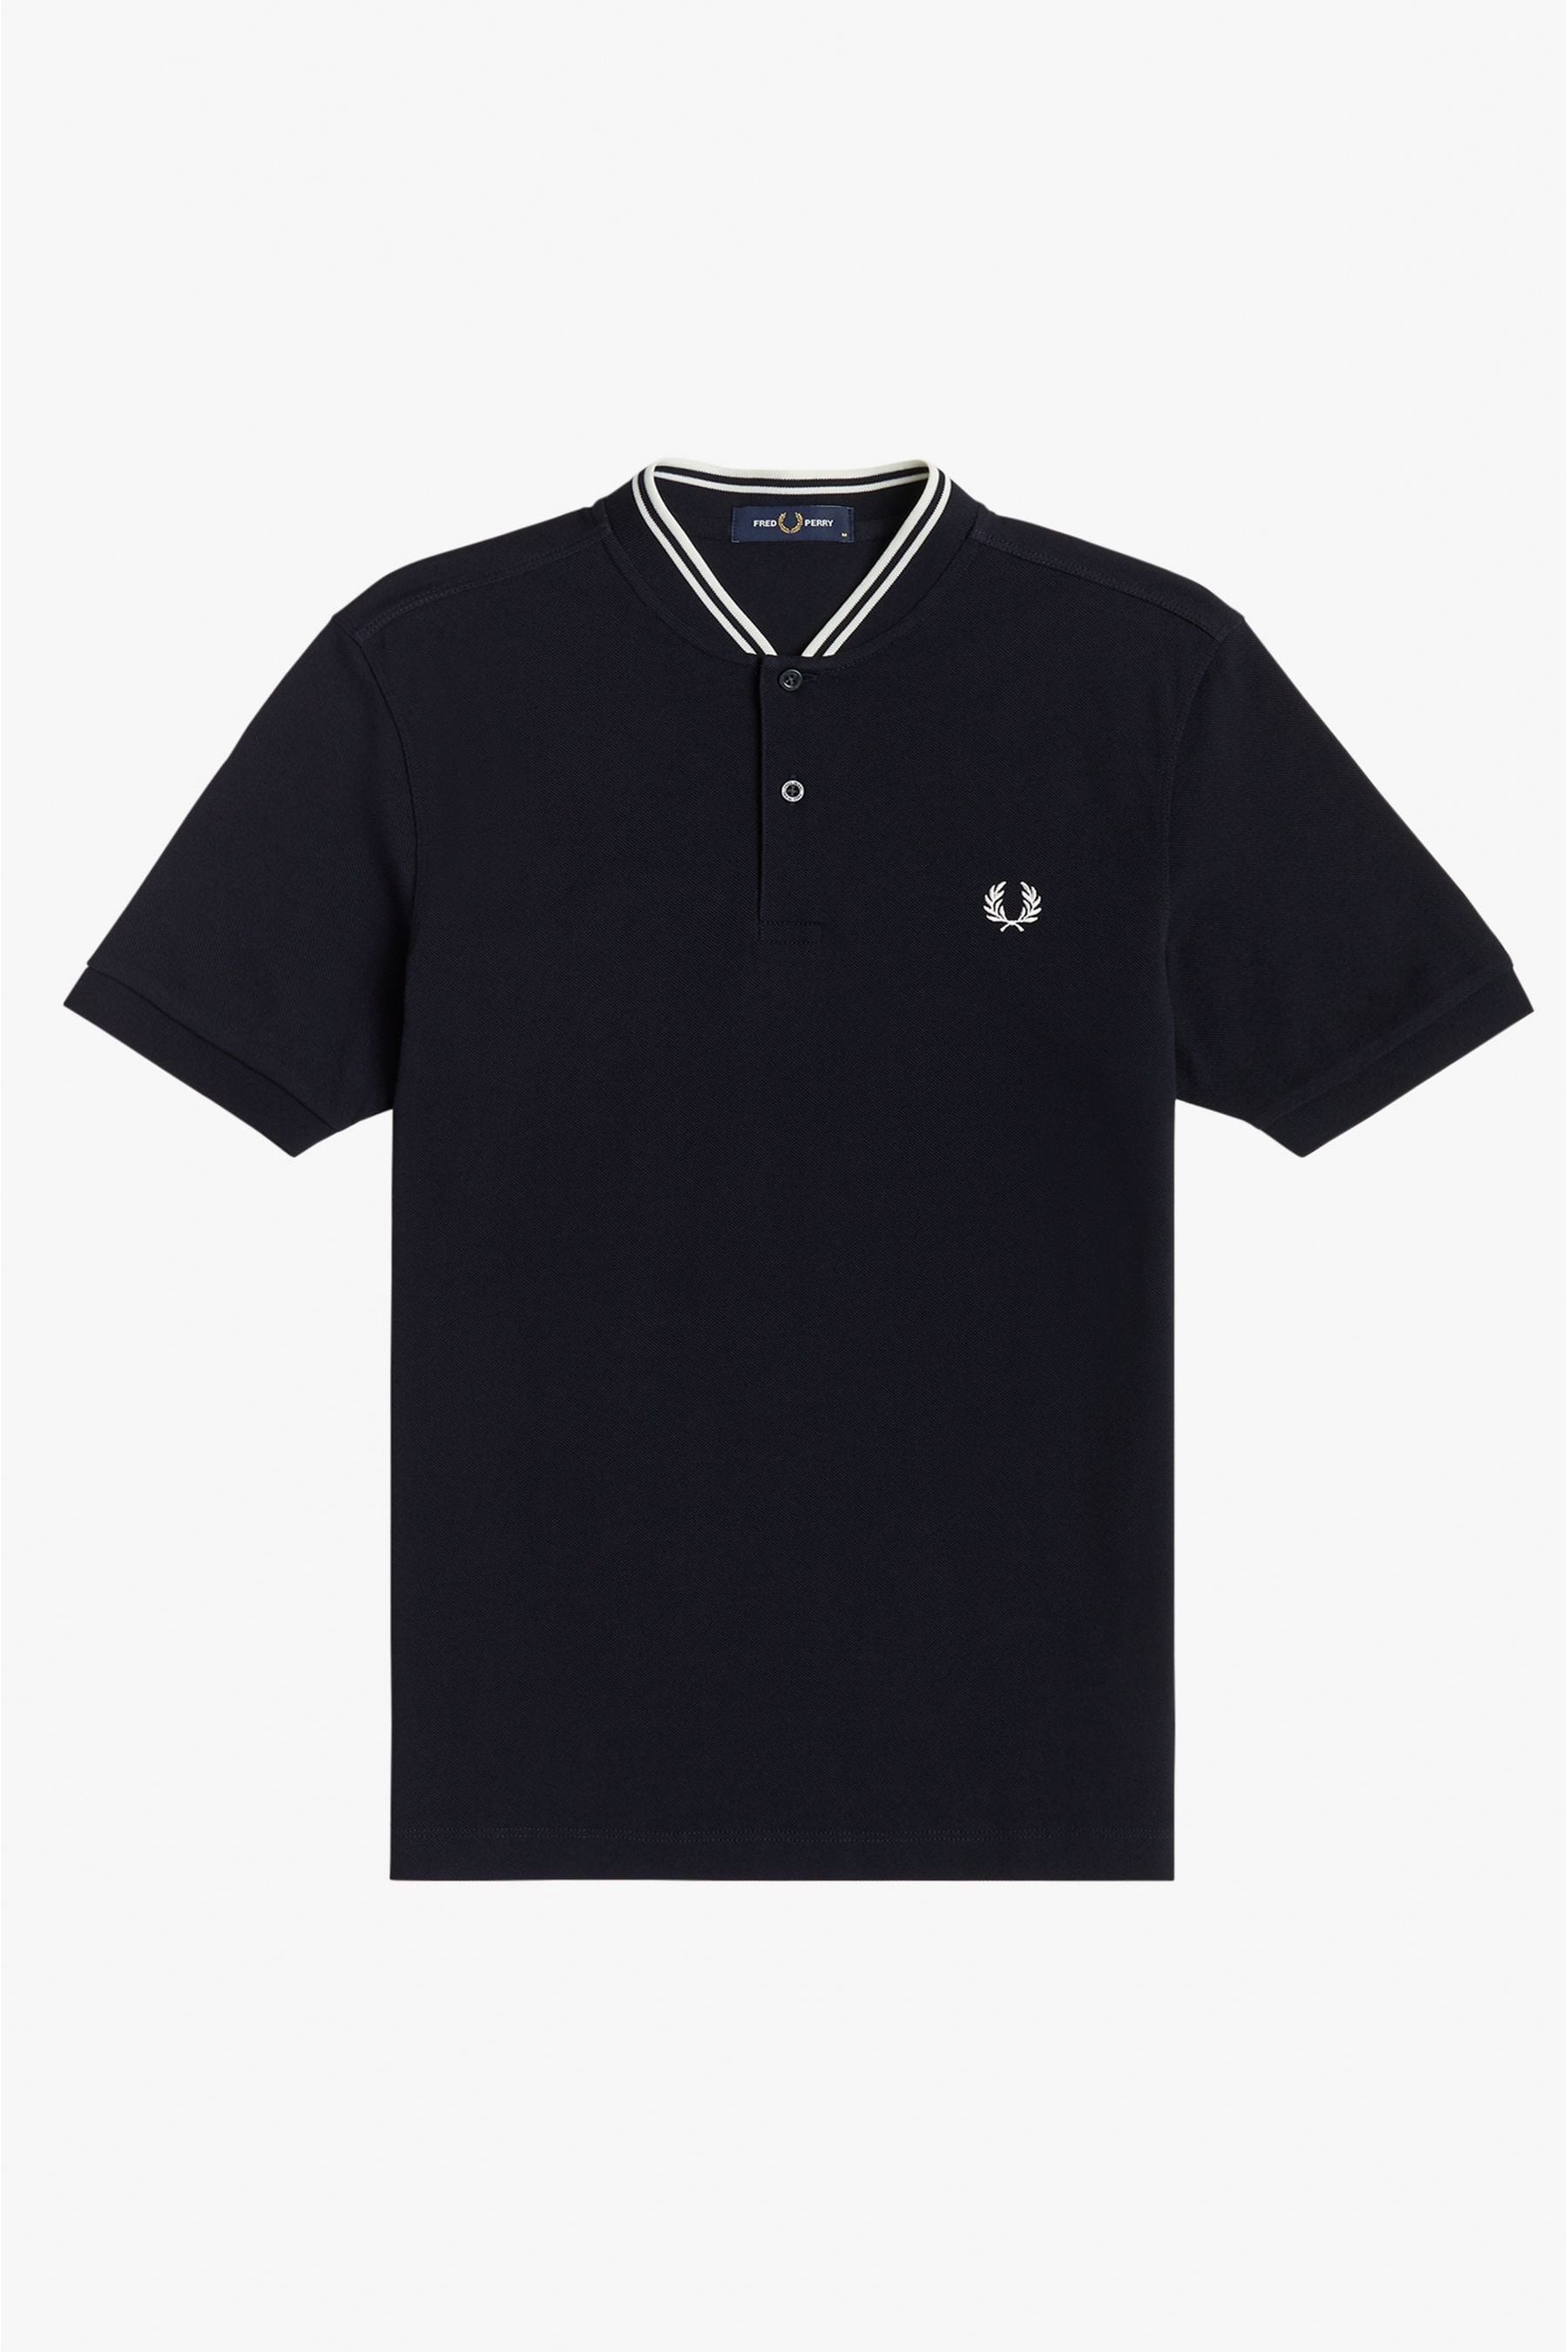 Buy Fred Perry Bomber Collar Polo Shirt from the Next UK online shop